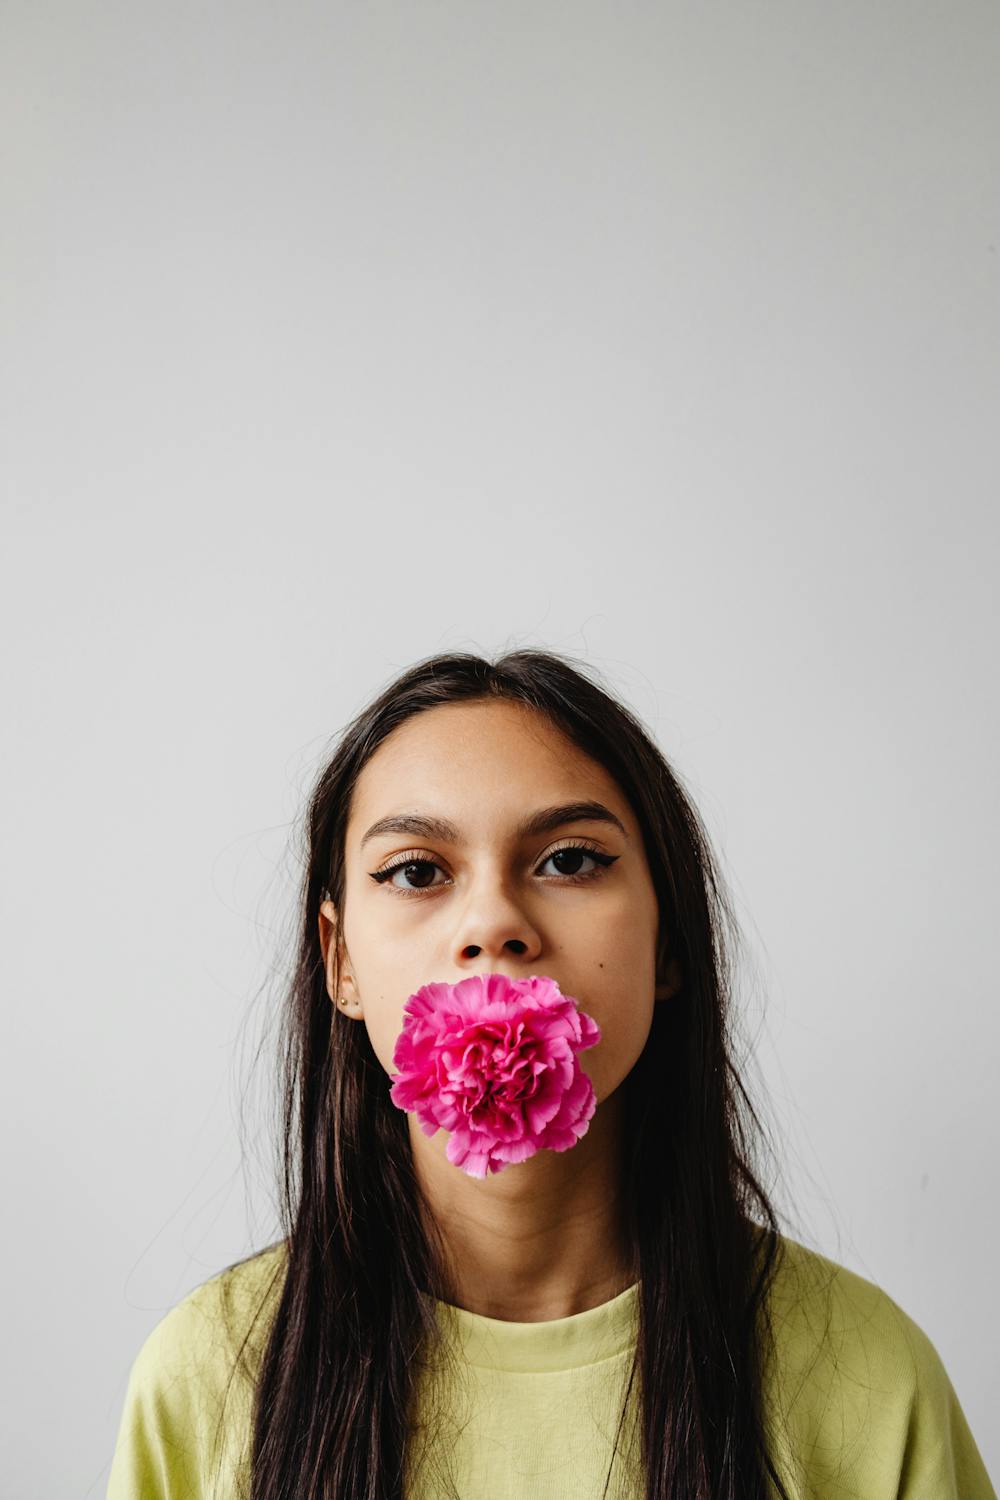 Portrait Of Woman With Flower In Mouth · Free Stock Photo